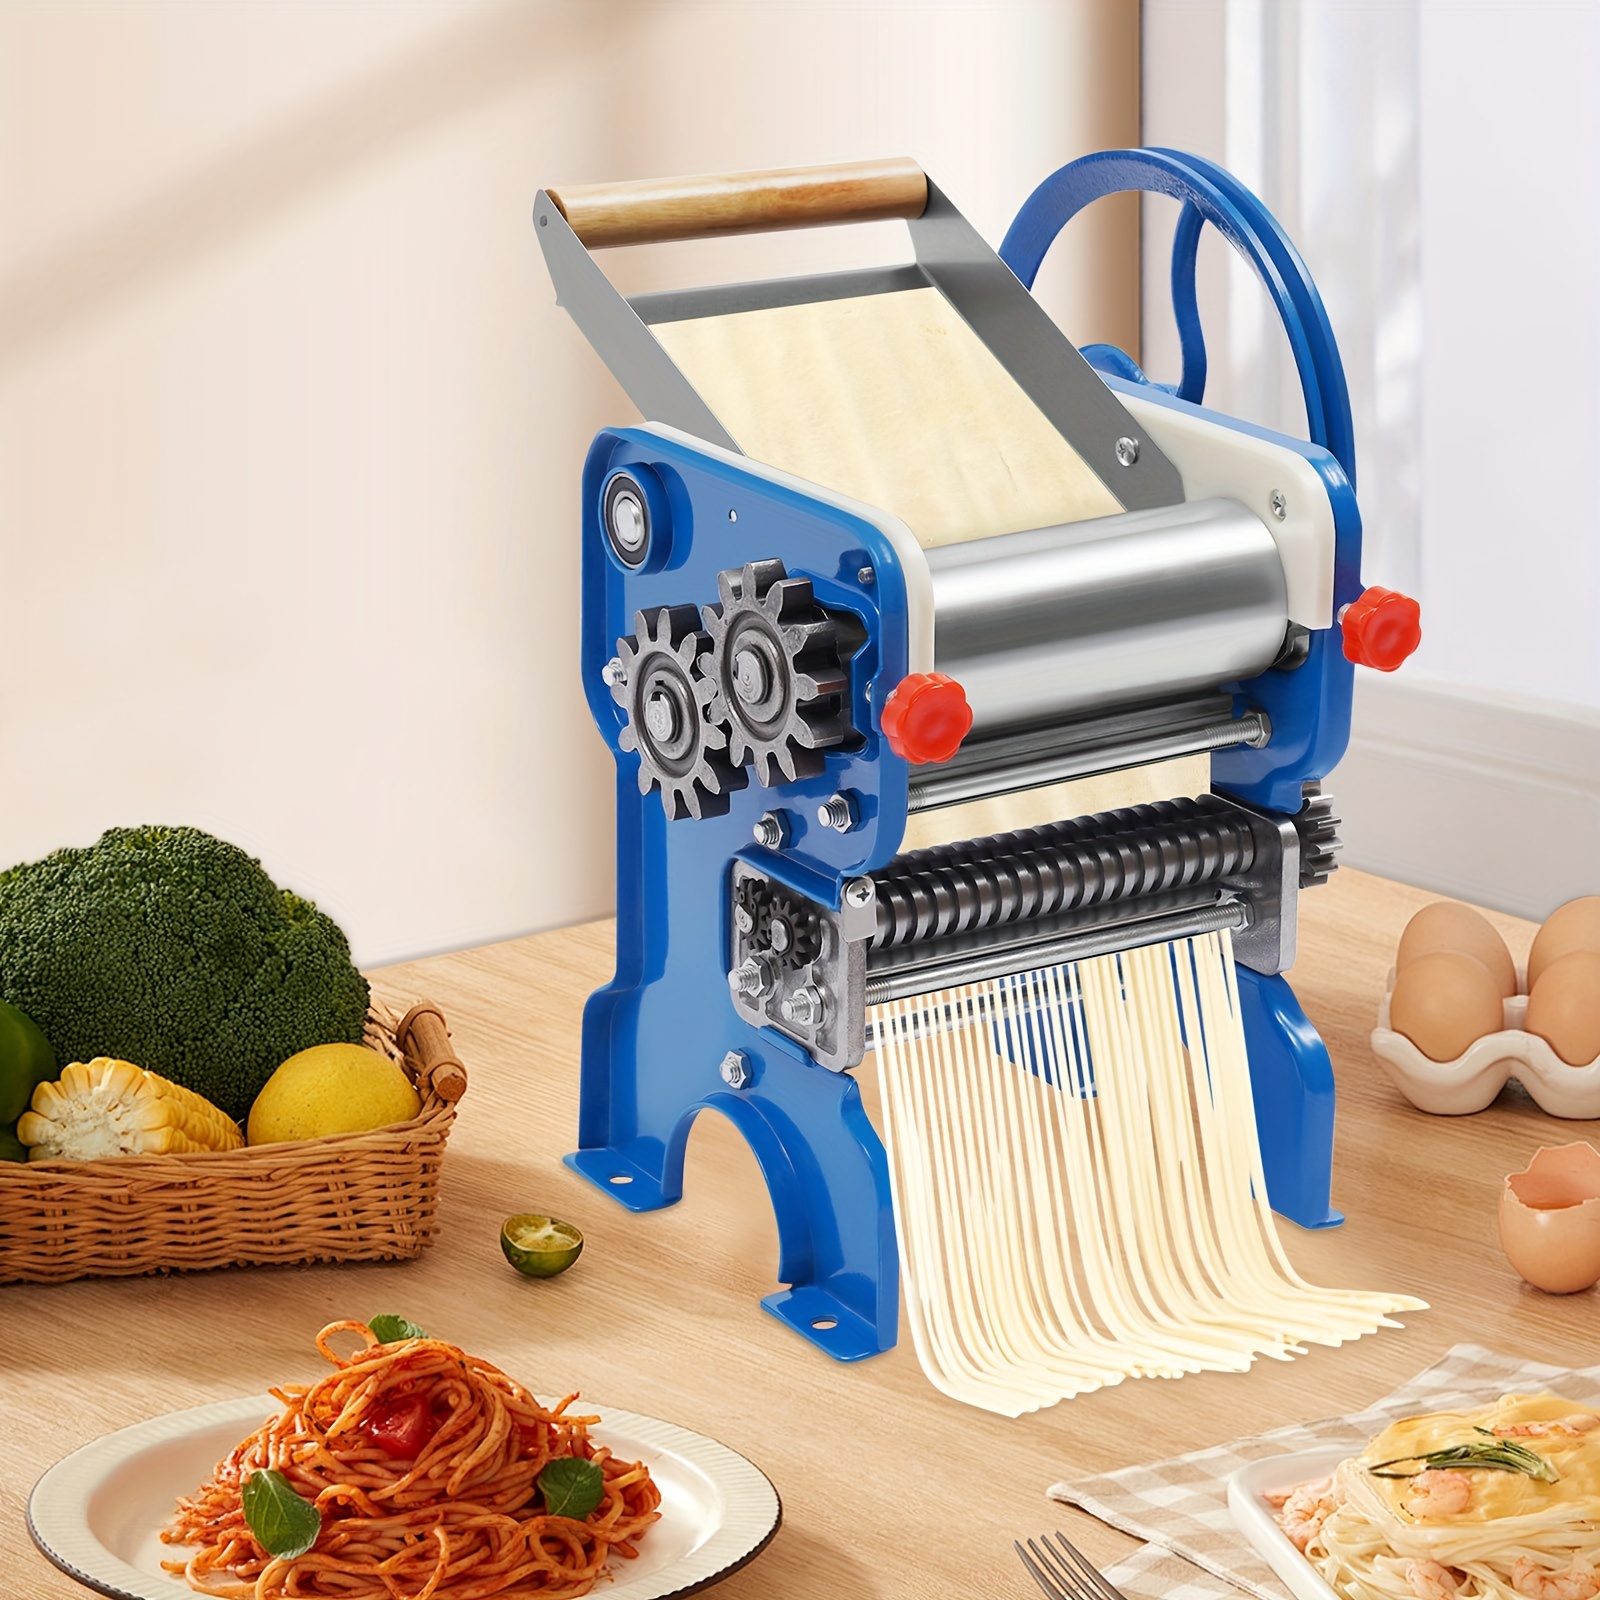 

Commercial Stainless Steel Manual Hand Noodle Machine